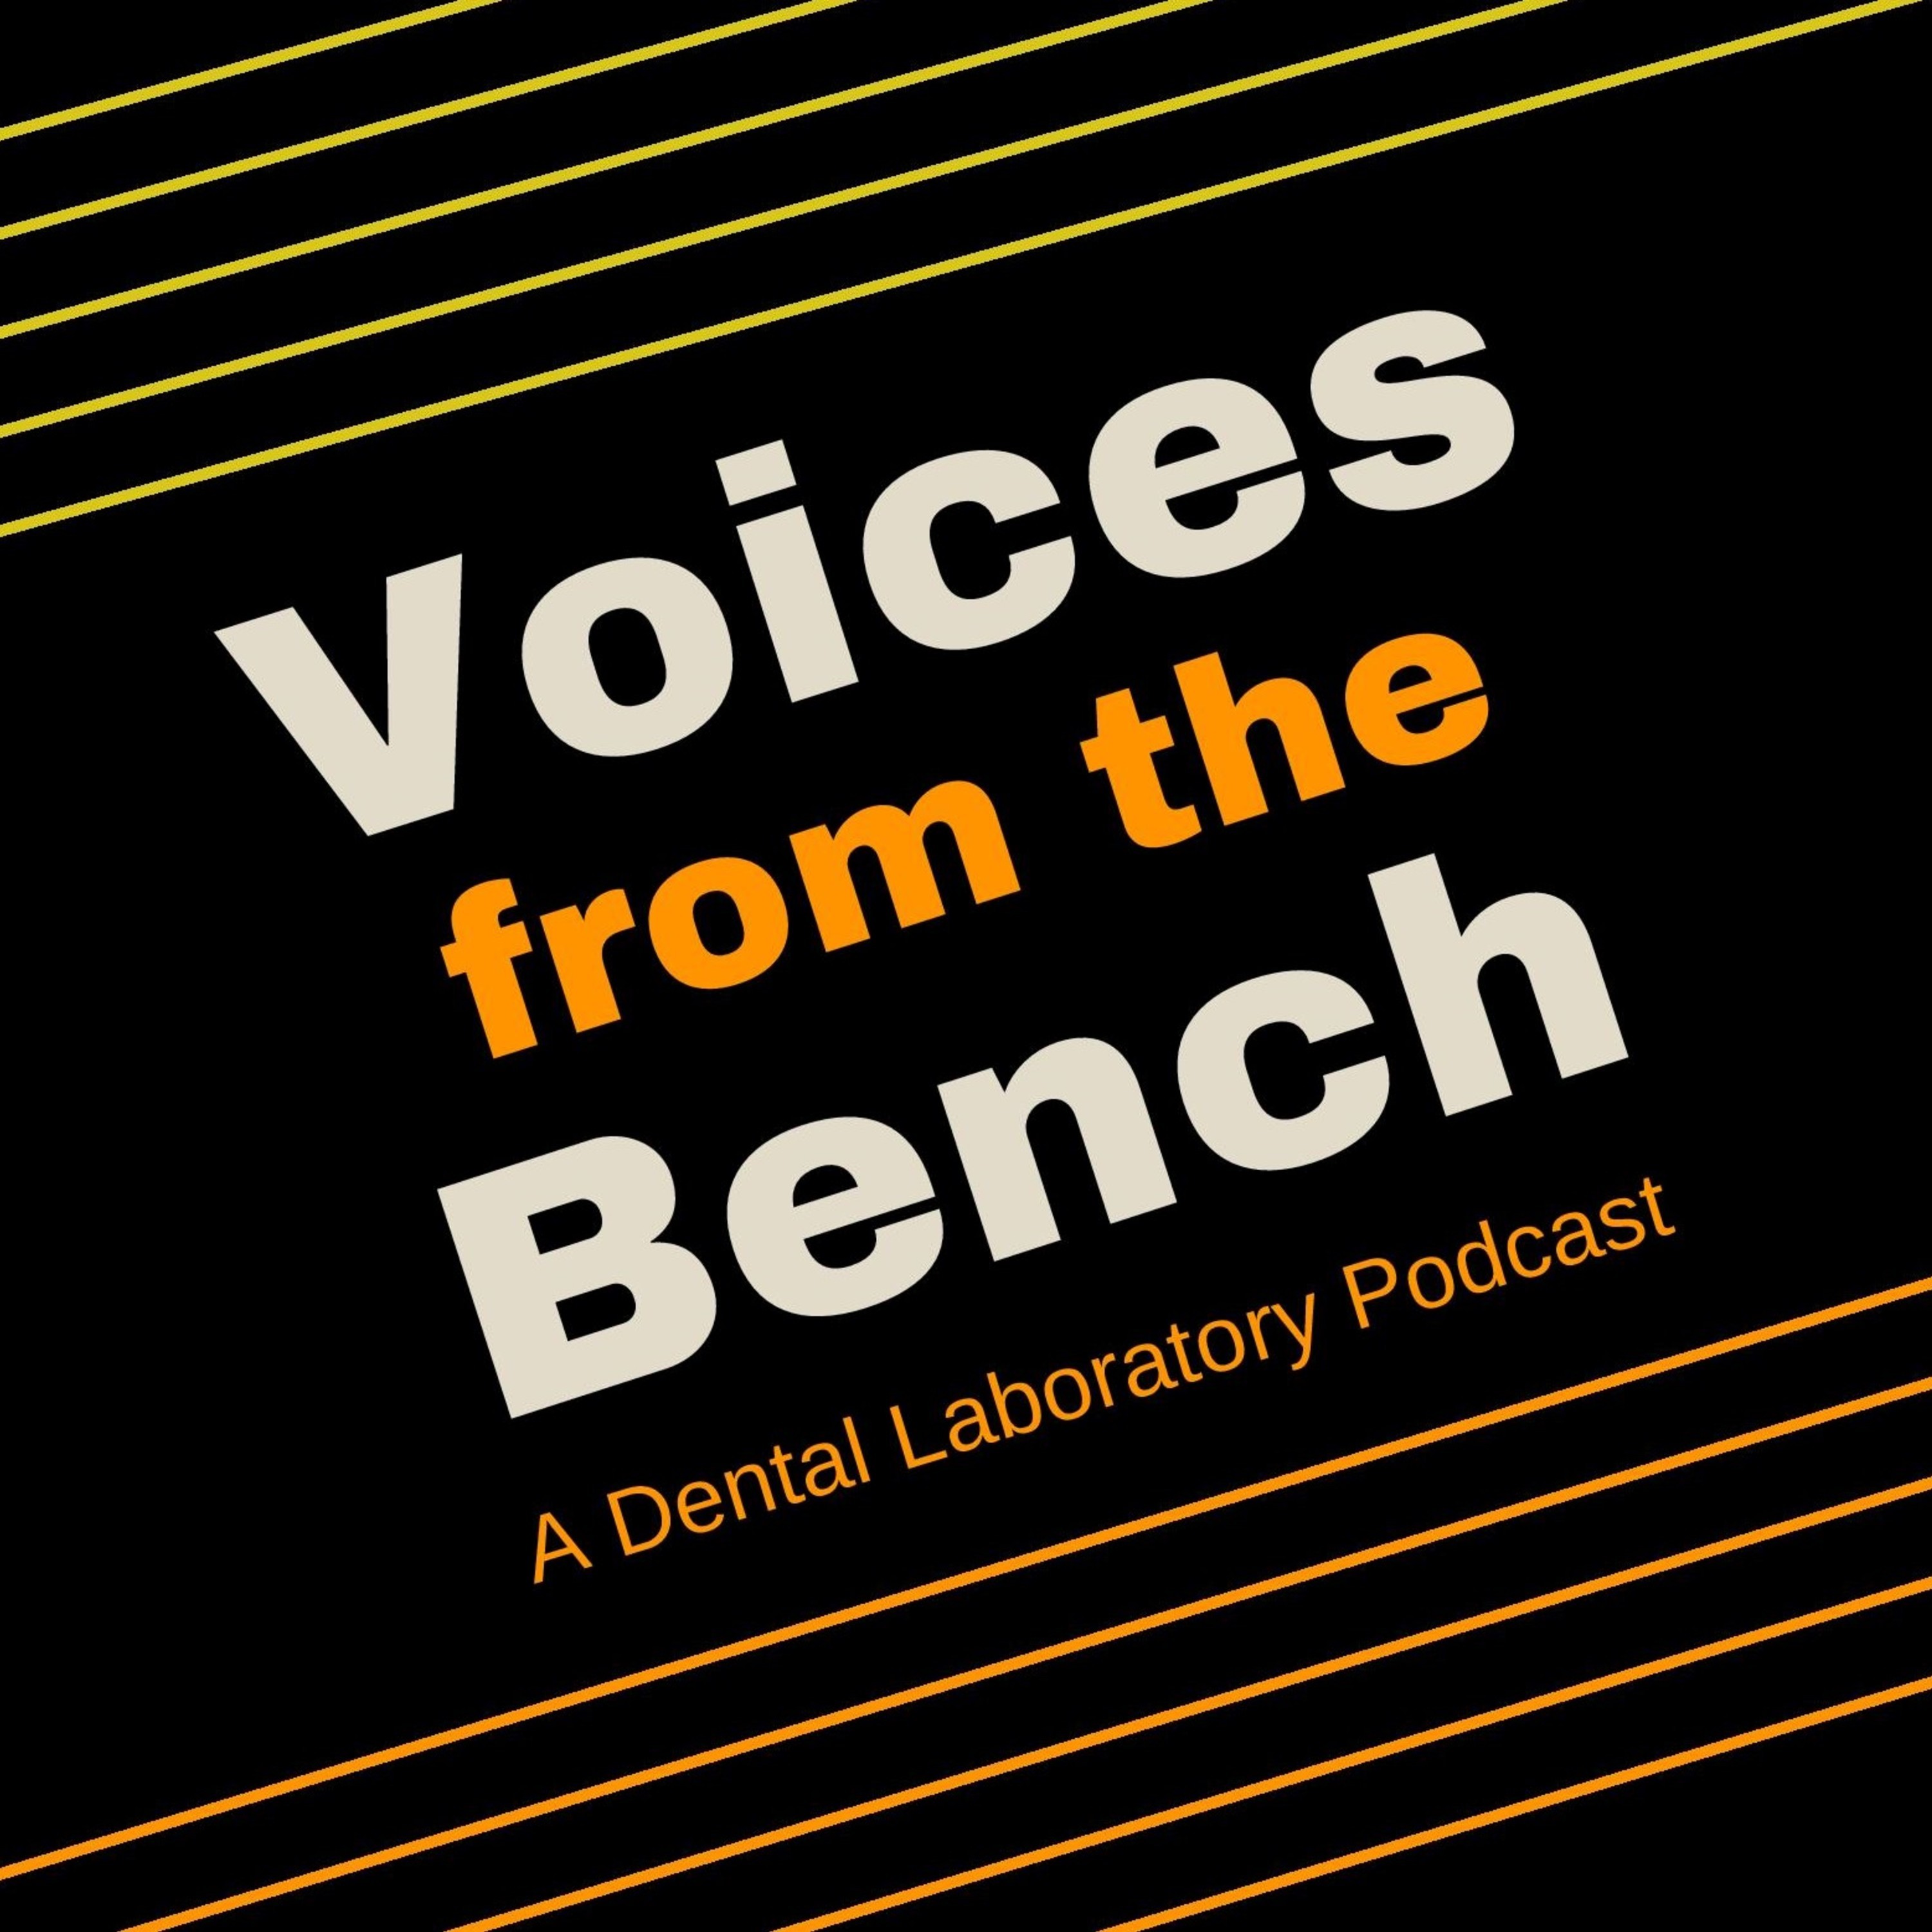 Episode 41: Grab a Chair for the Chairperson: Interview with Jim Gorgol and Cal-Lab Part 2(VFTB41)